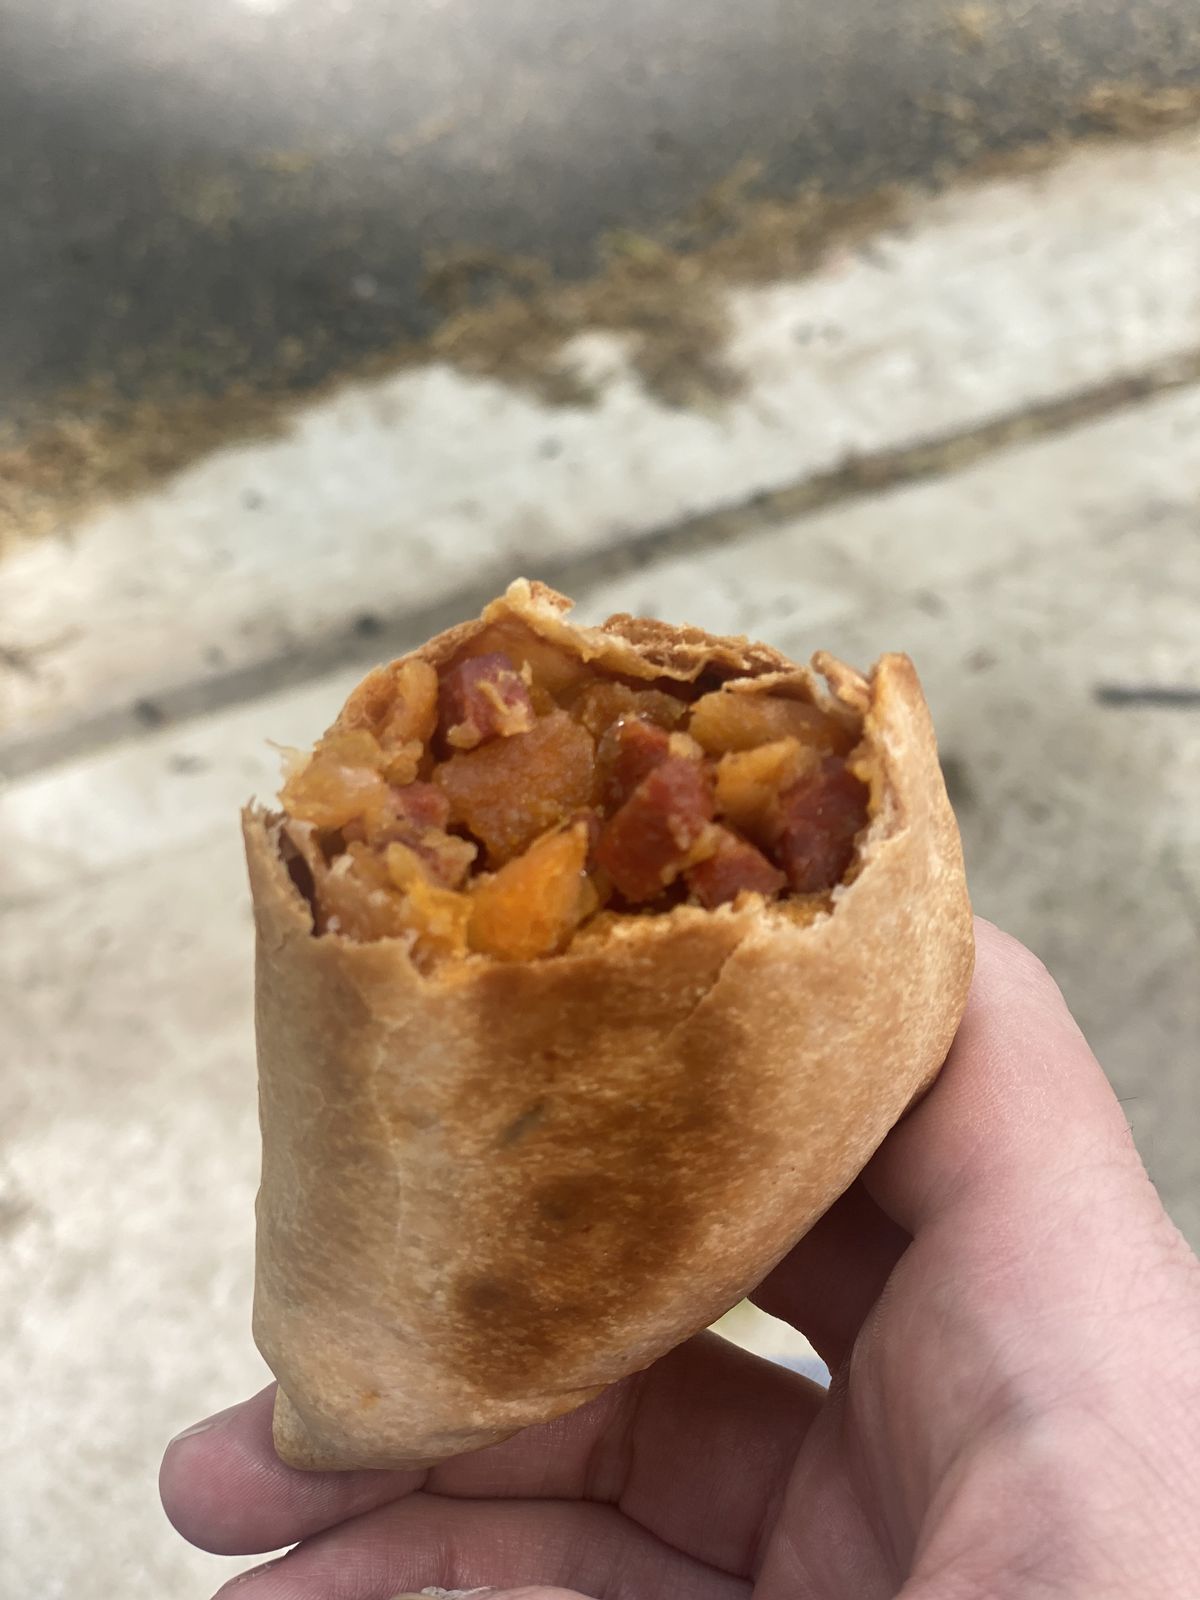 A customer holds a chorizo empanada upright; it’s filled with orange potatoes and red cubes of sausage